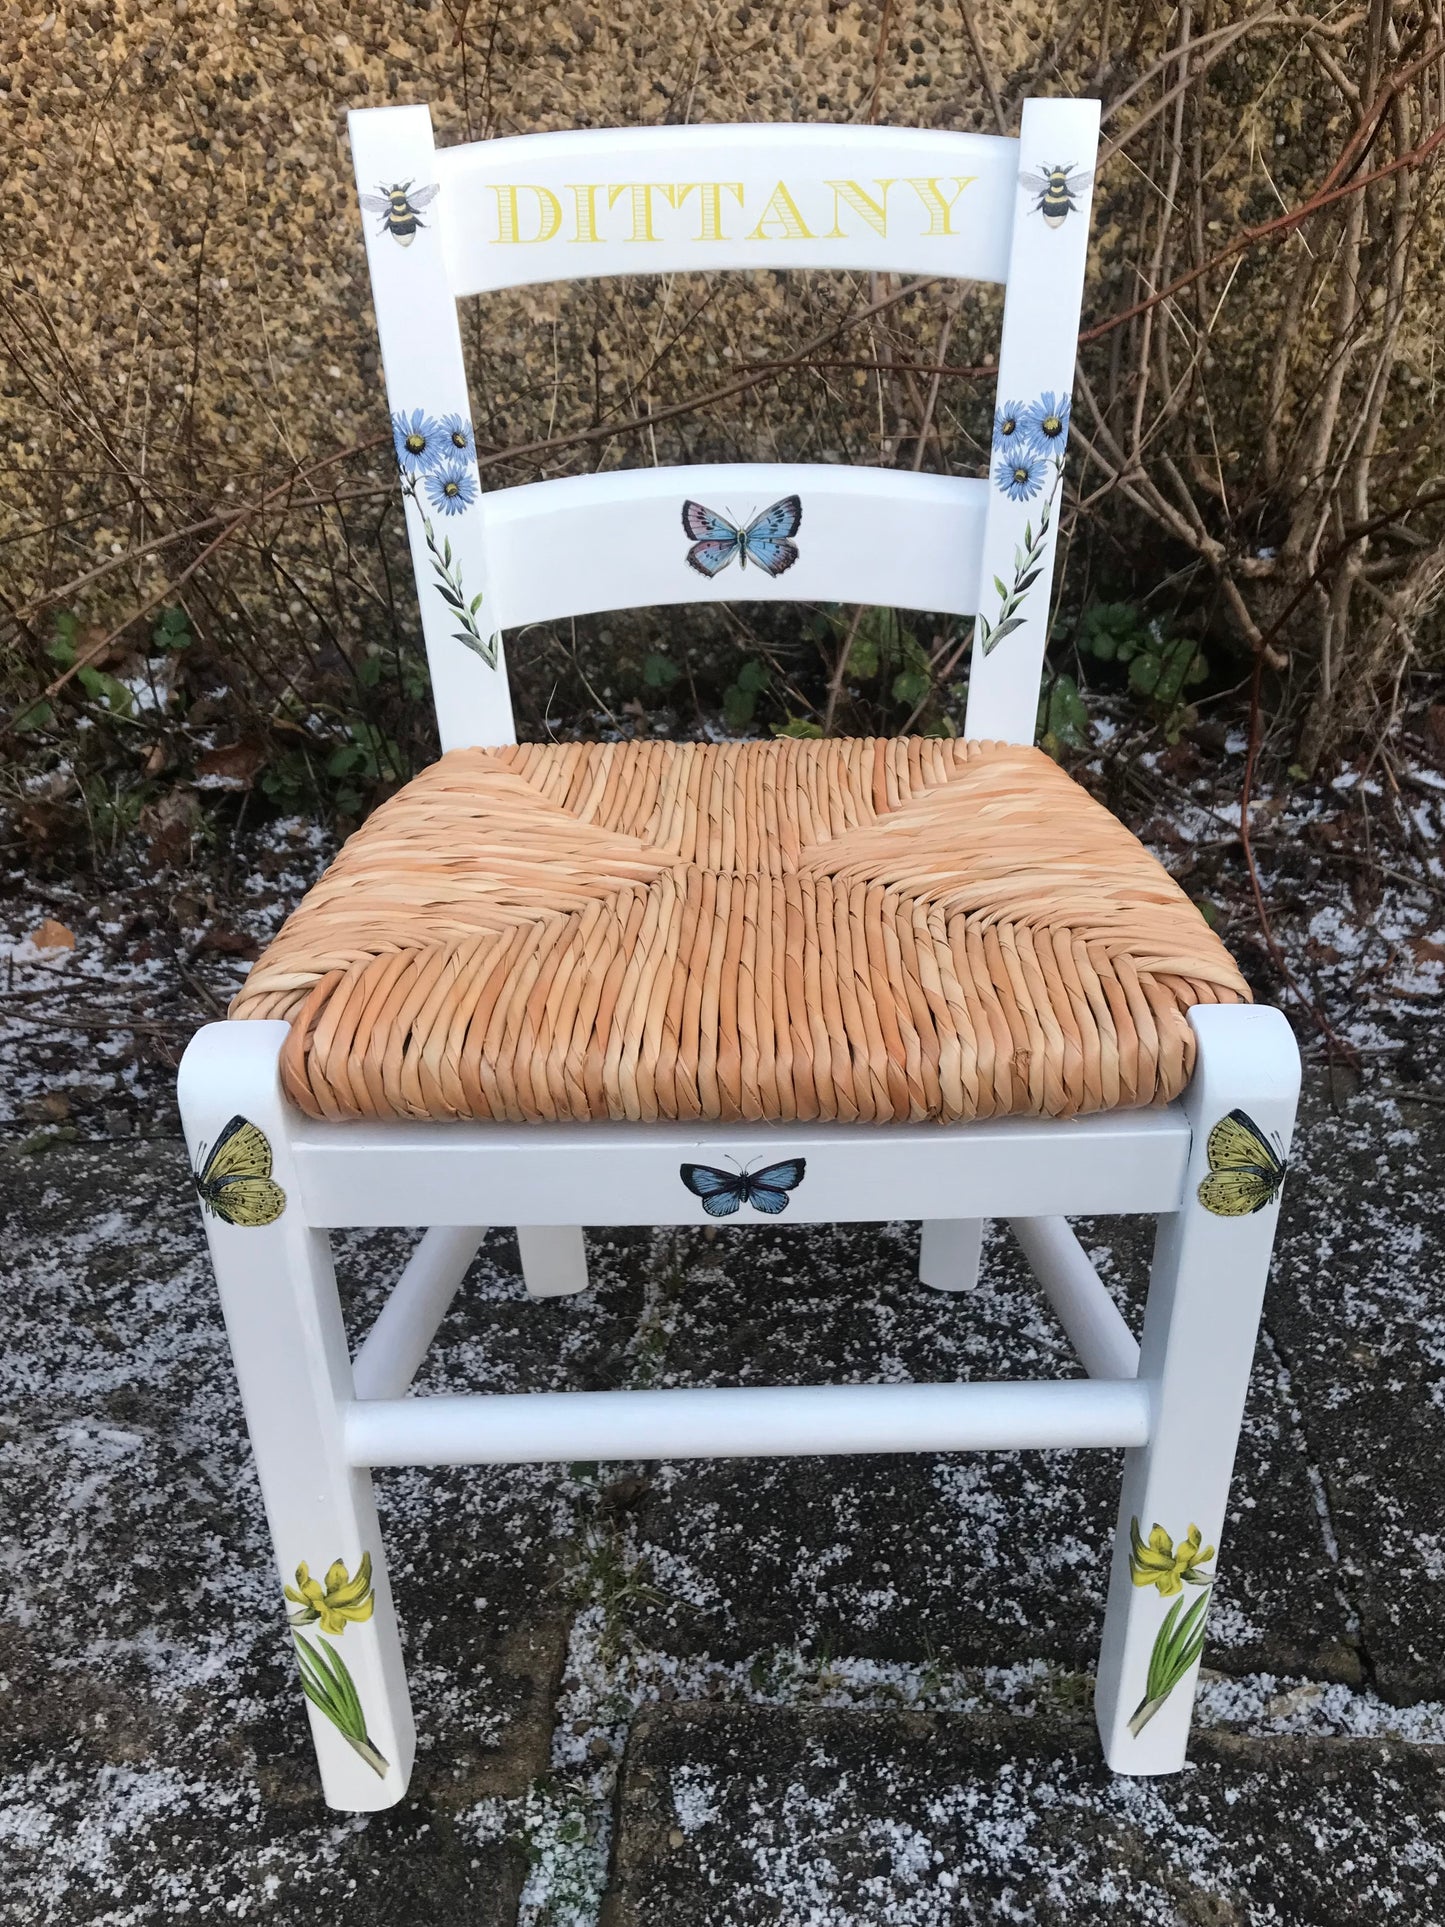 Rush seat personalised children's chair - Flower friends theme - made to order